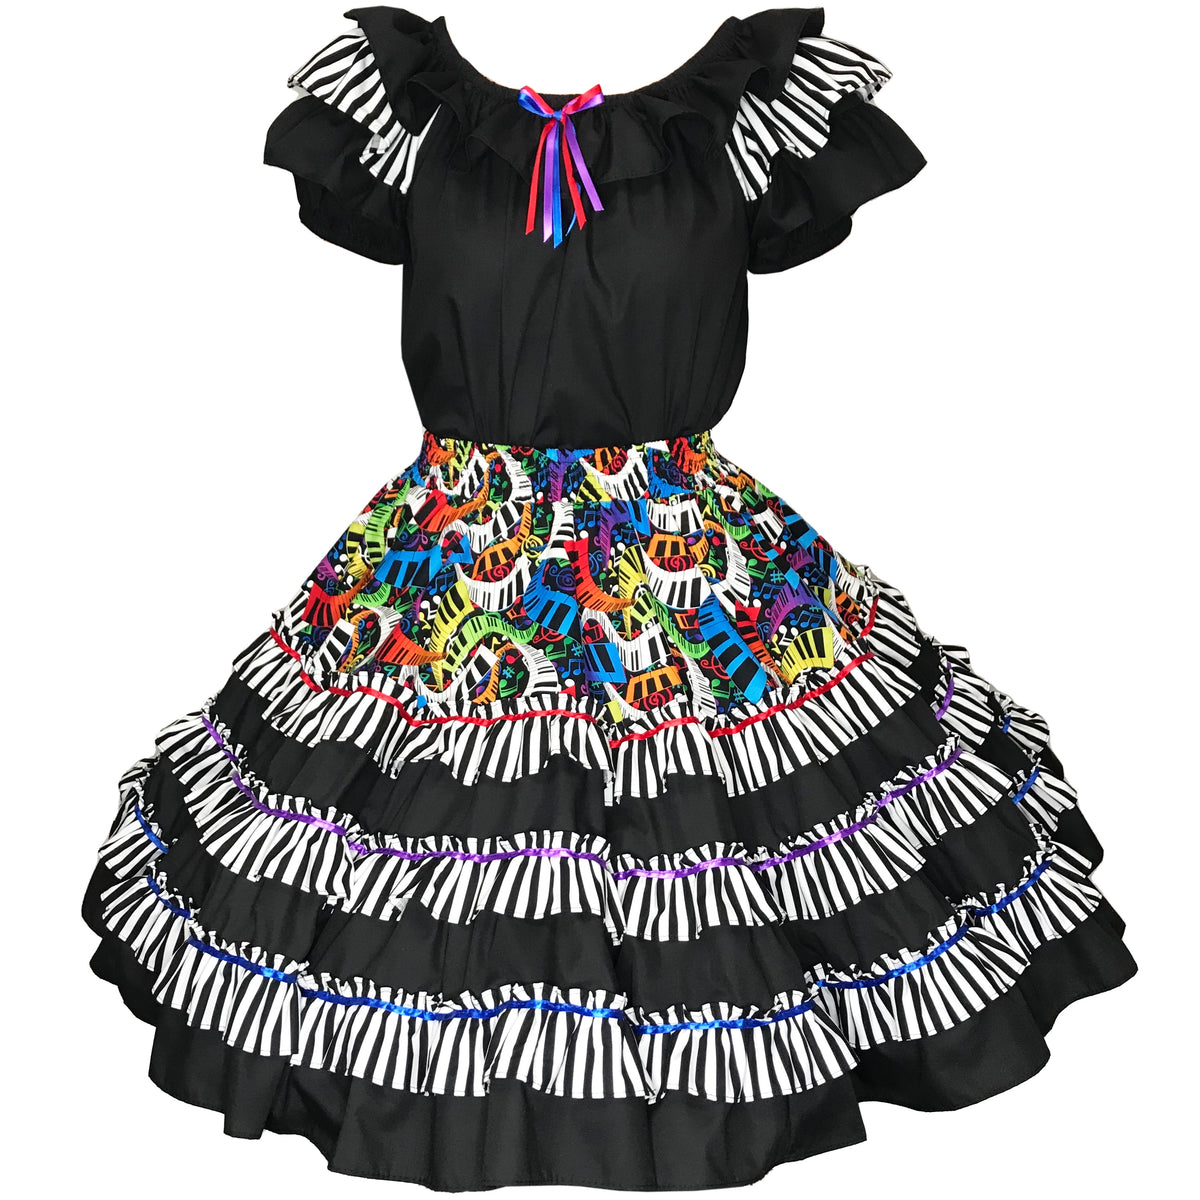 Musical Multi-color Square Dance Outfit